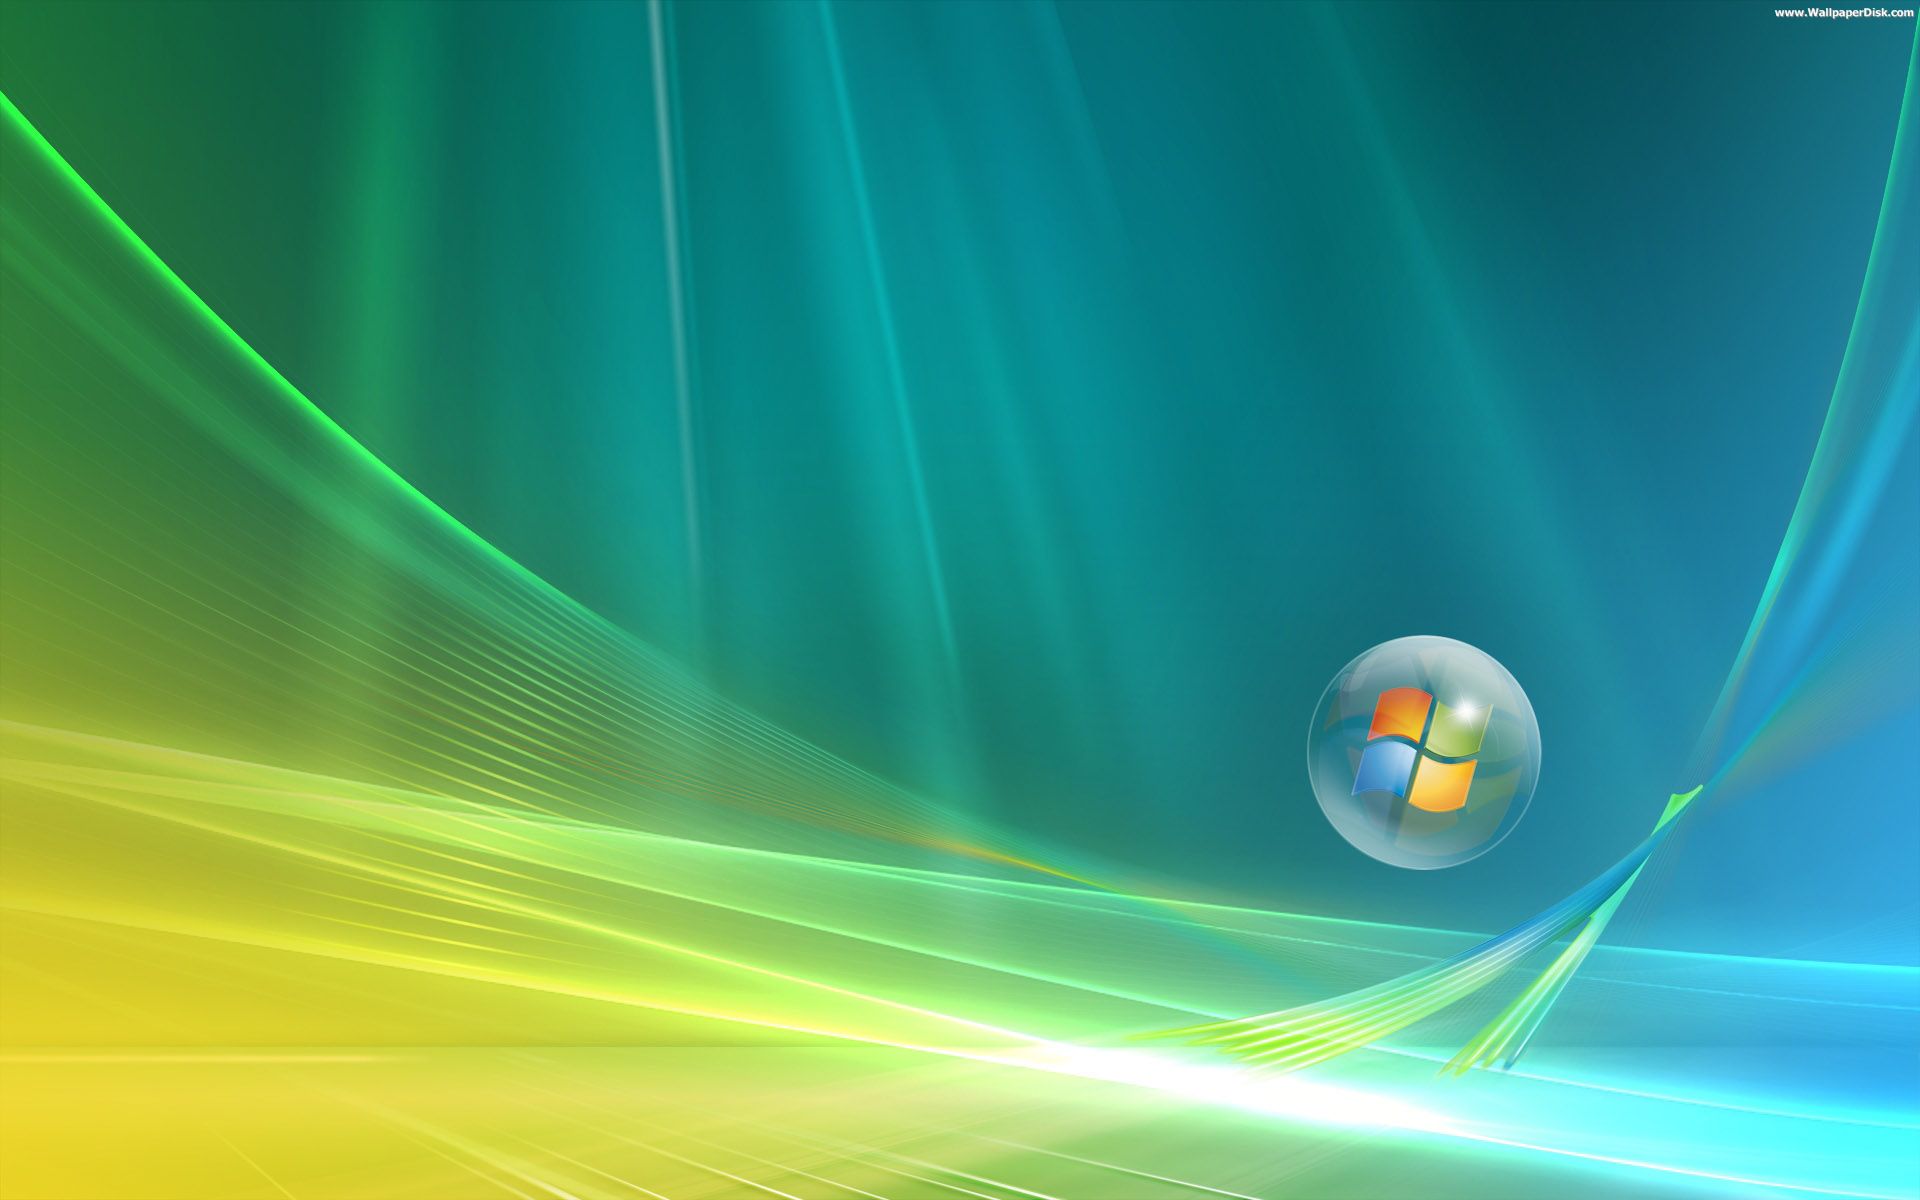 Wallpaperdisk Wallpaper Software And Operating System Windows